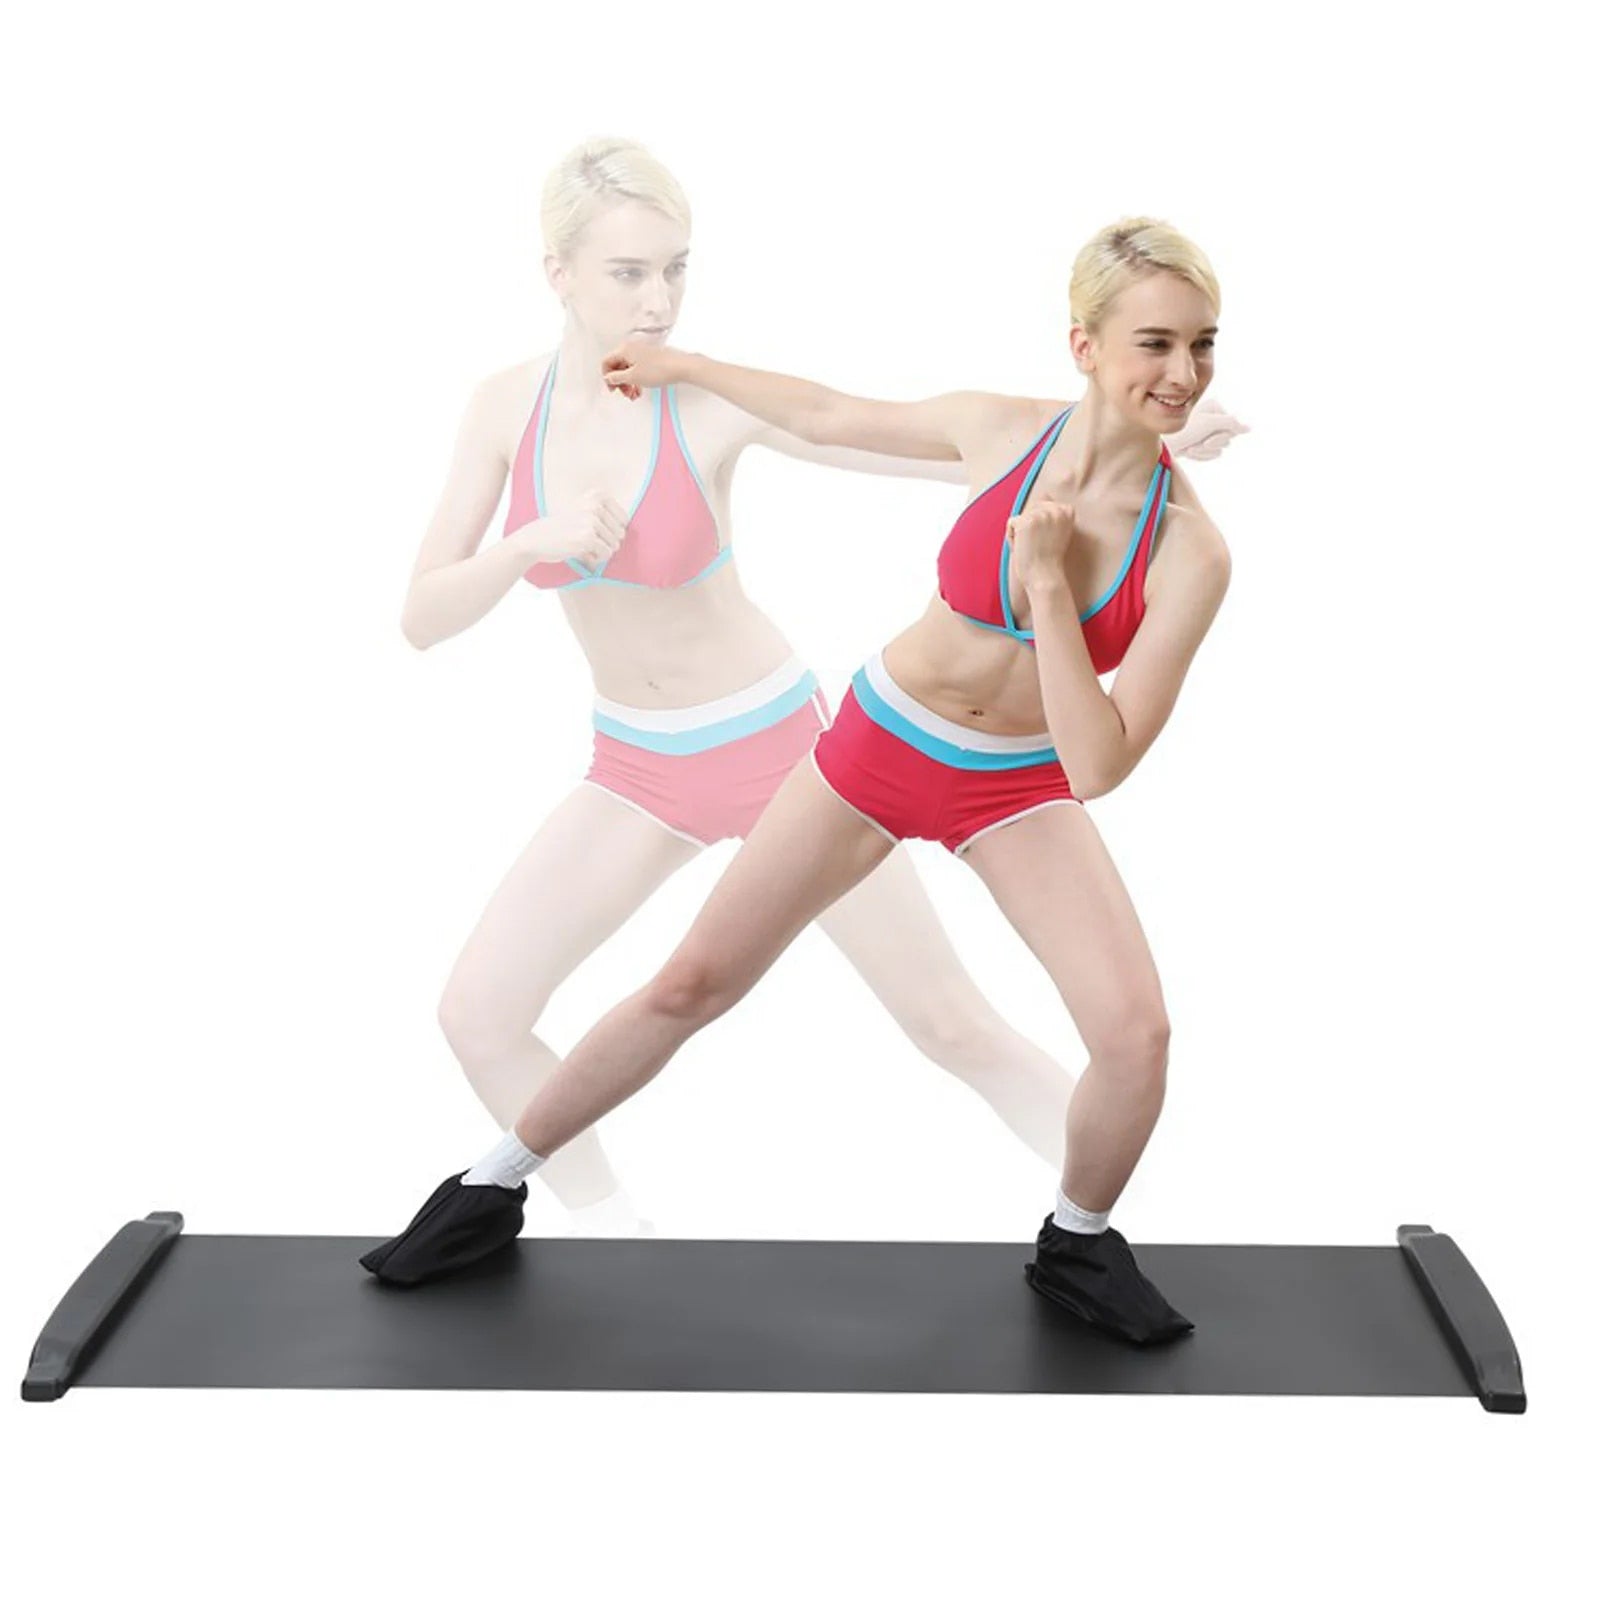 GlideFit Exercise Board